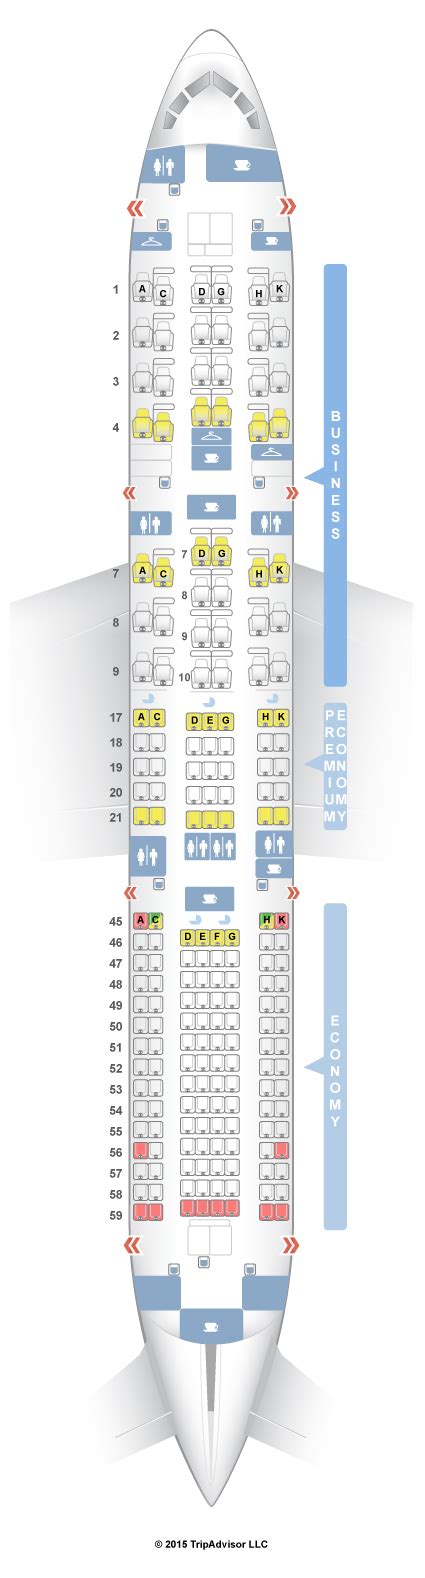 boeing 787-9 seating chart japan airlines